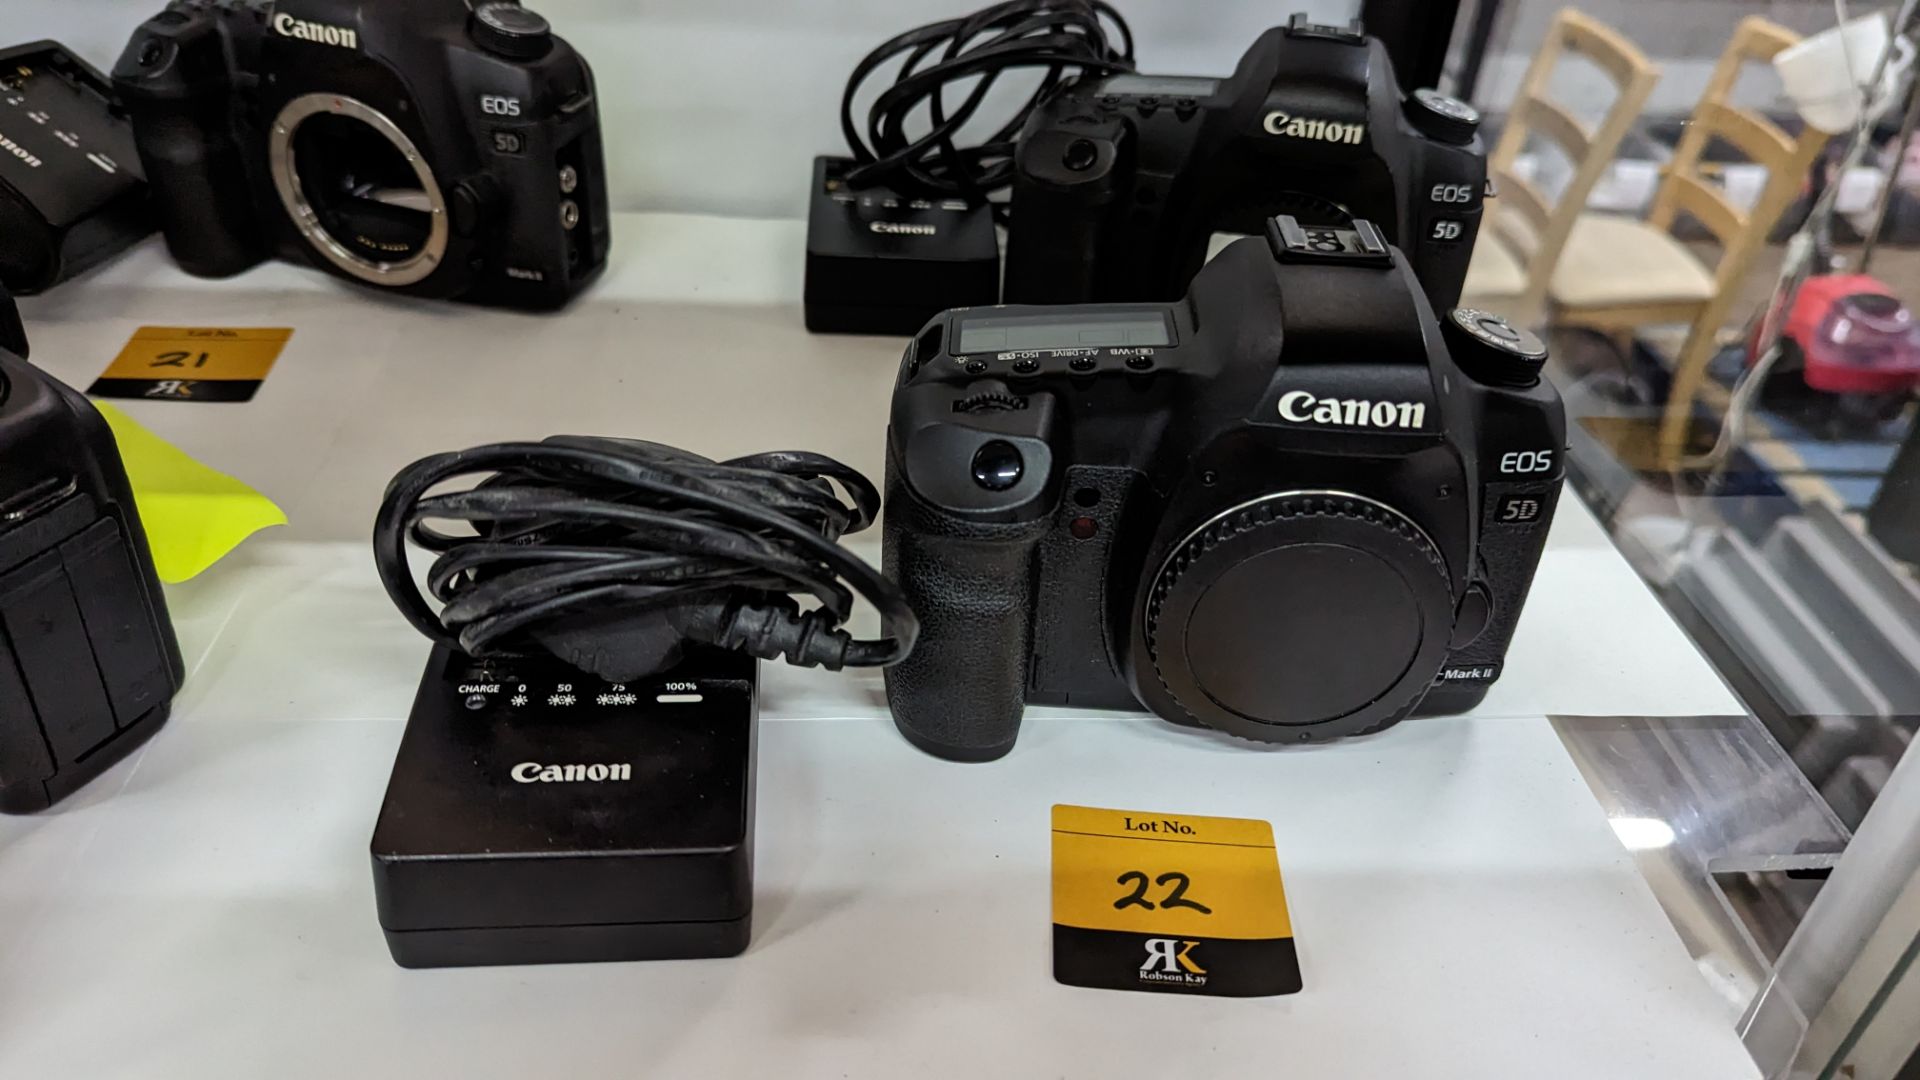 Canon EOS 5D Mark II digital camera plus Canon battery charger. N.B. no lens or battery included wi